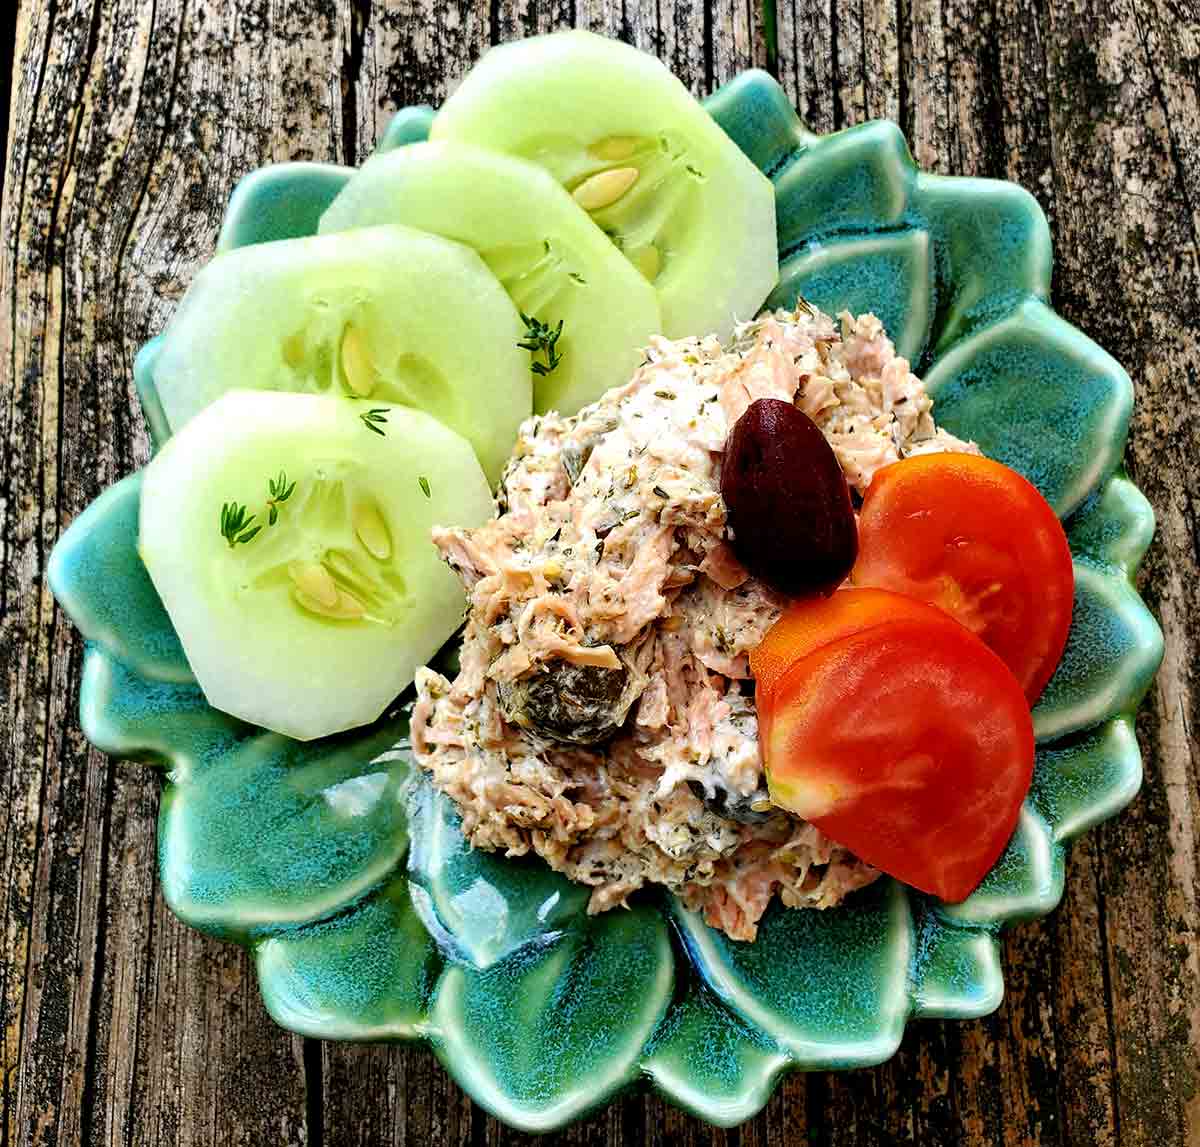 Tuna Salad With Capers, Yogurt, and Zaatar pictured in a green leaf-shaped bowl on a wooden table.